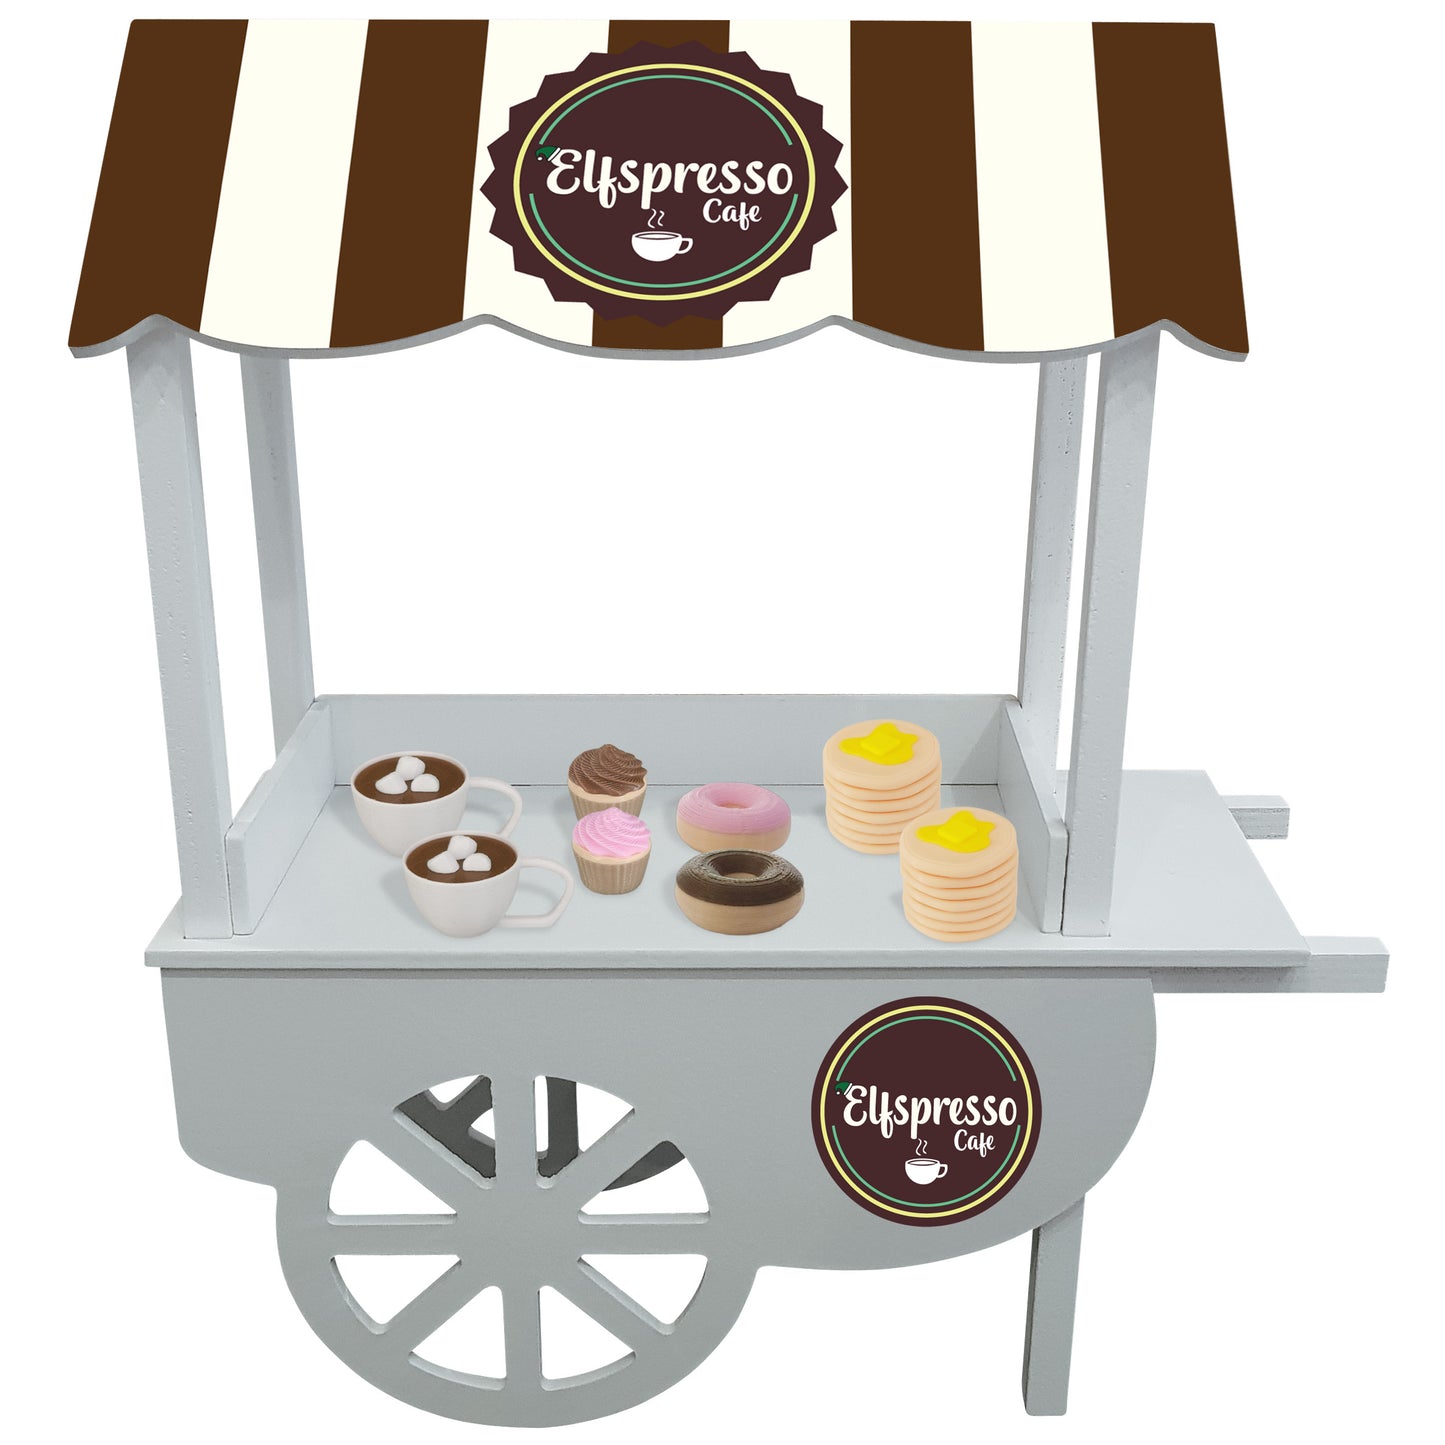 Cafe shop for elves with miniature cocoa, donuts, cupcakes and pancakes